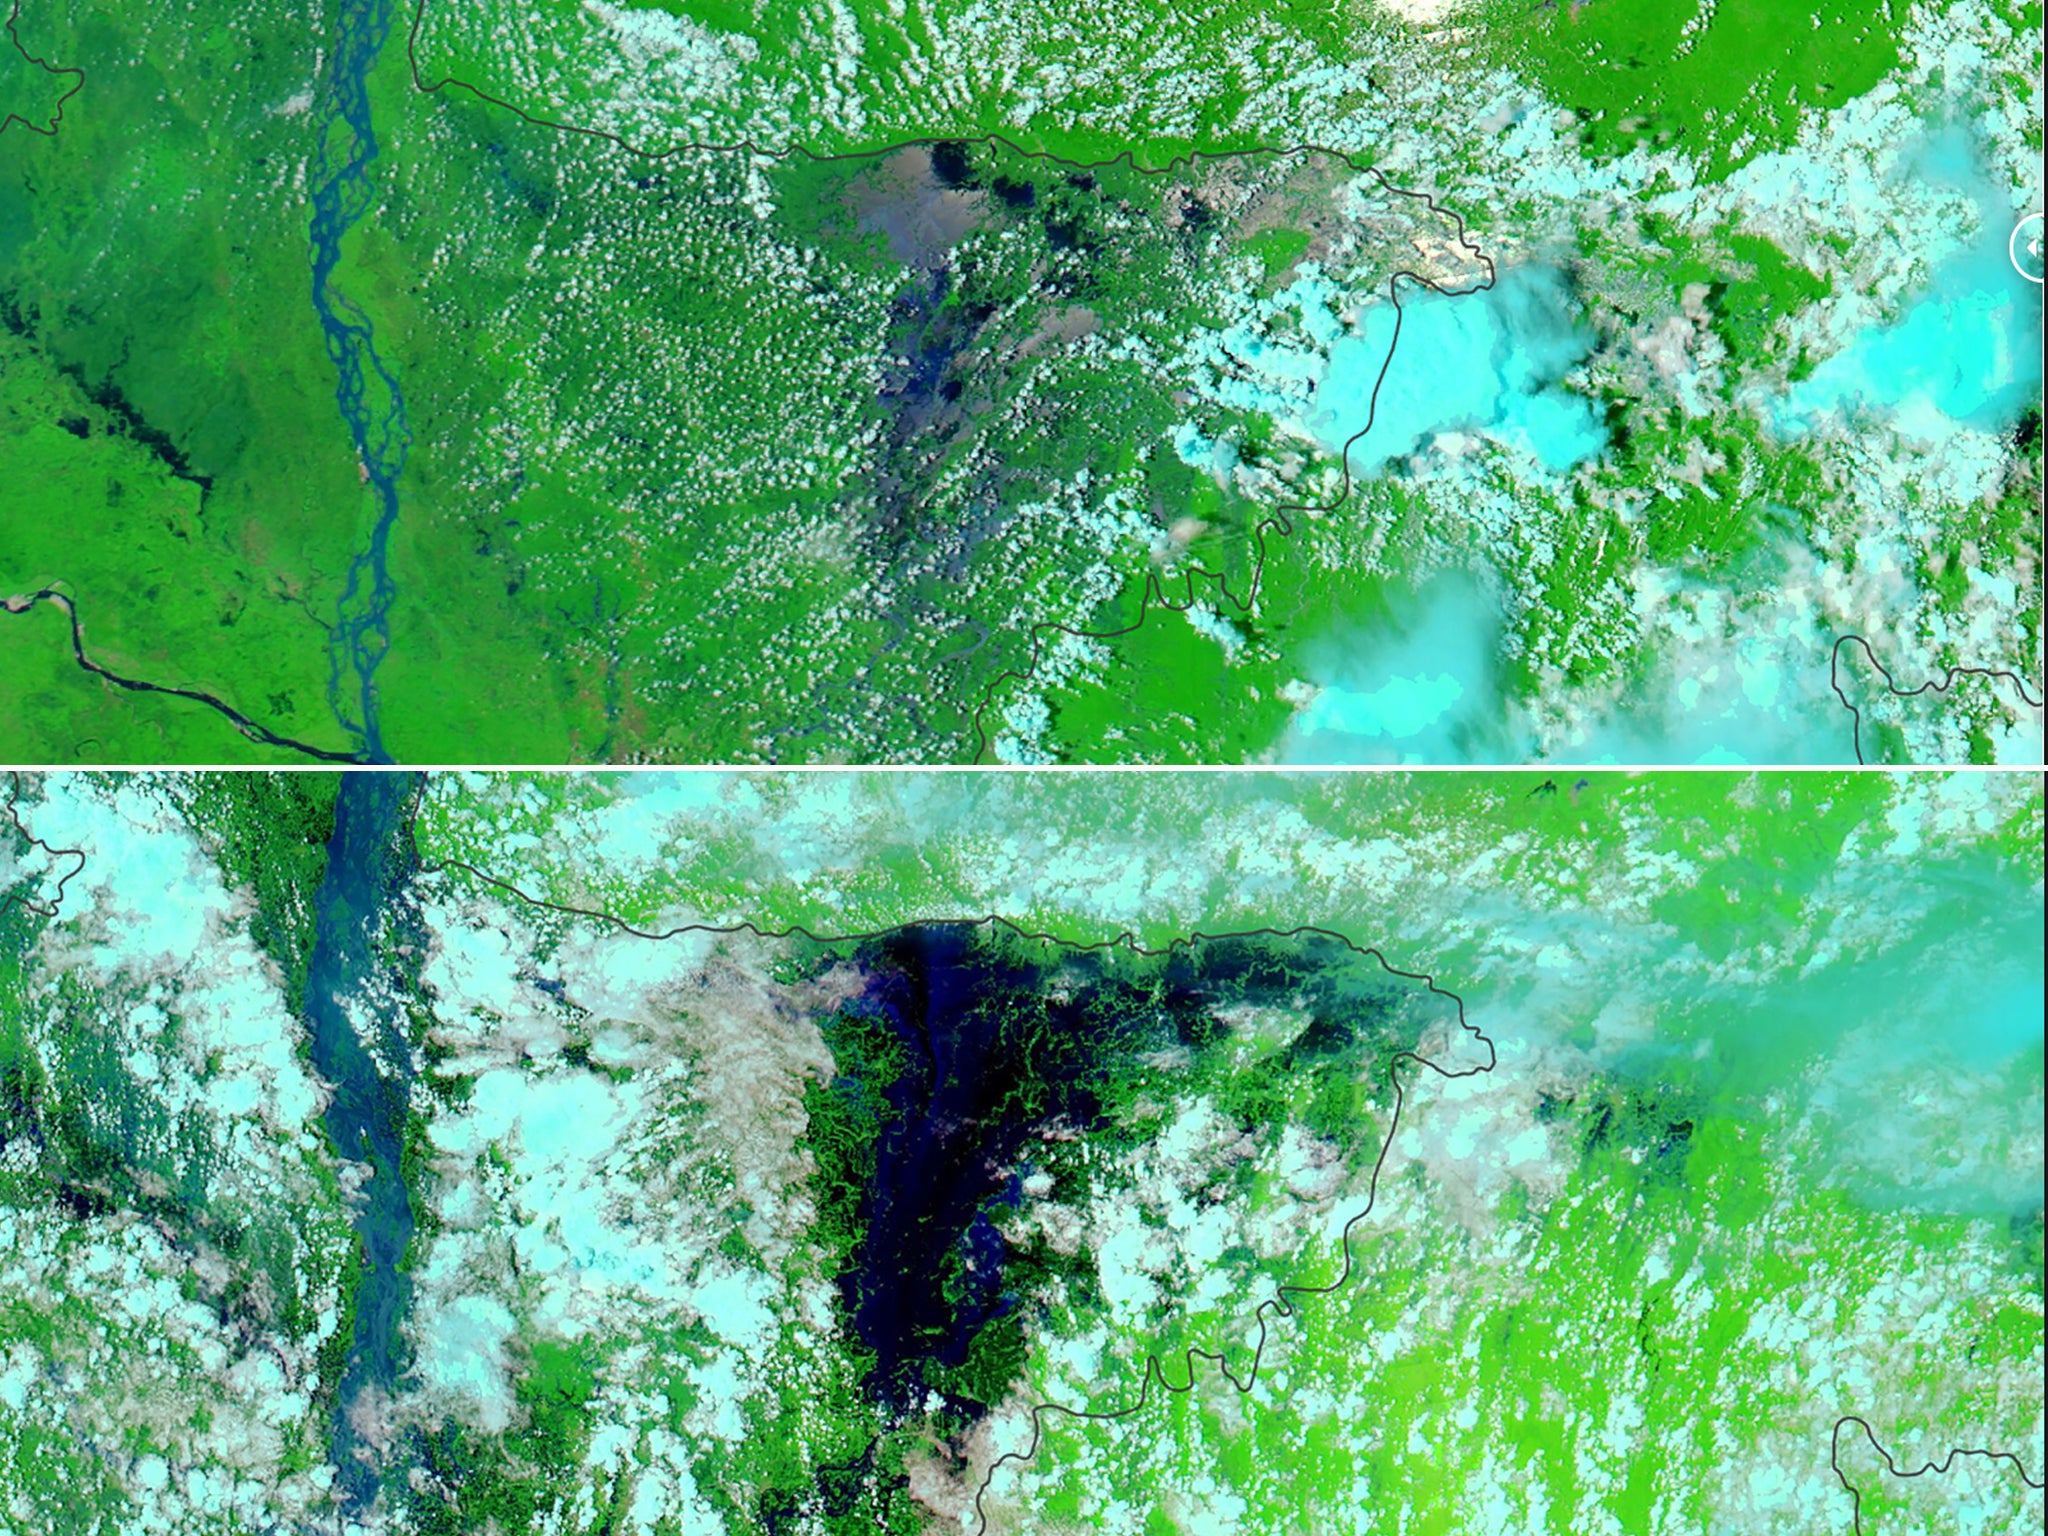 Eastern Bangladesh seen before and after unusually severe flooding in the 2020 monsoon season